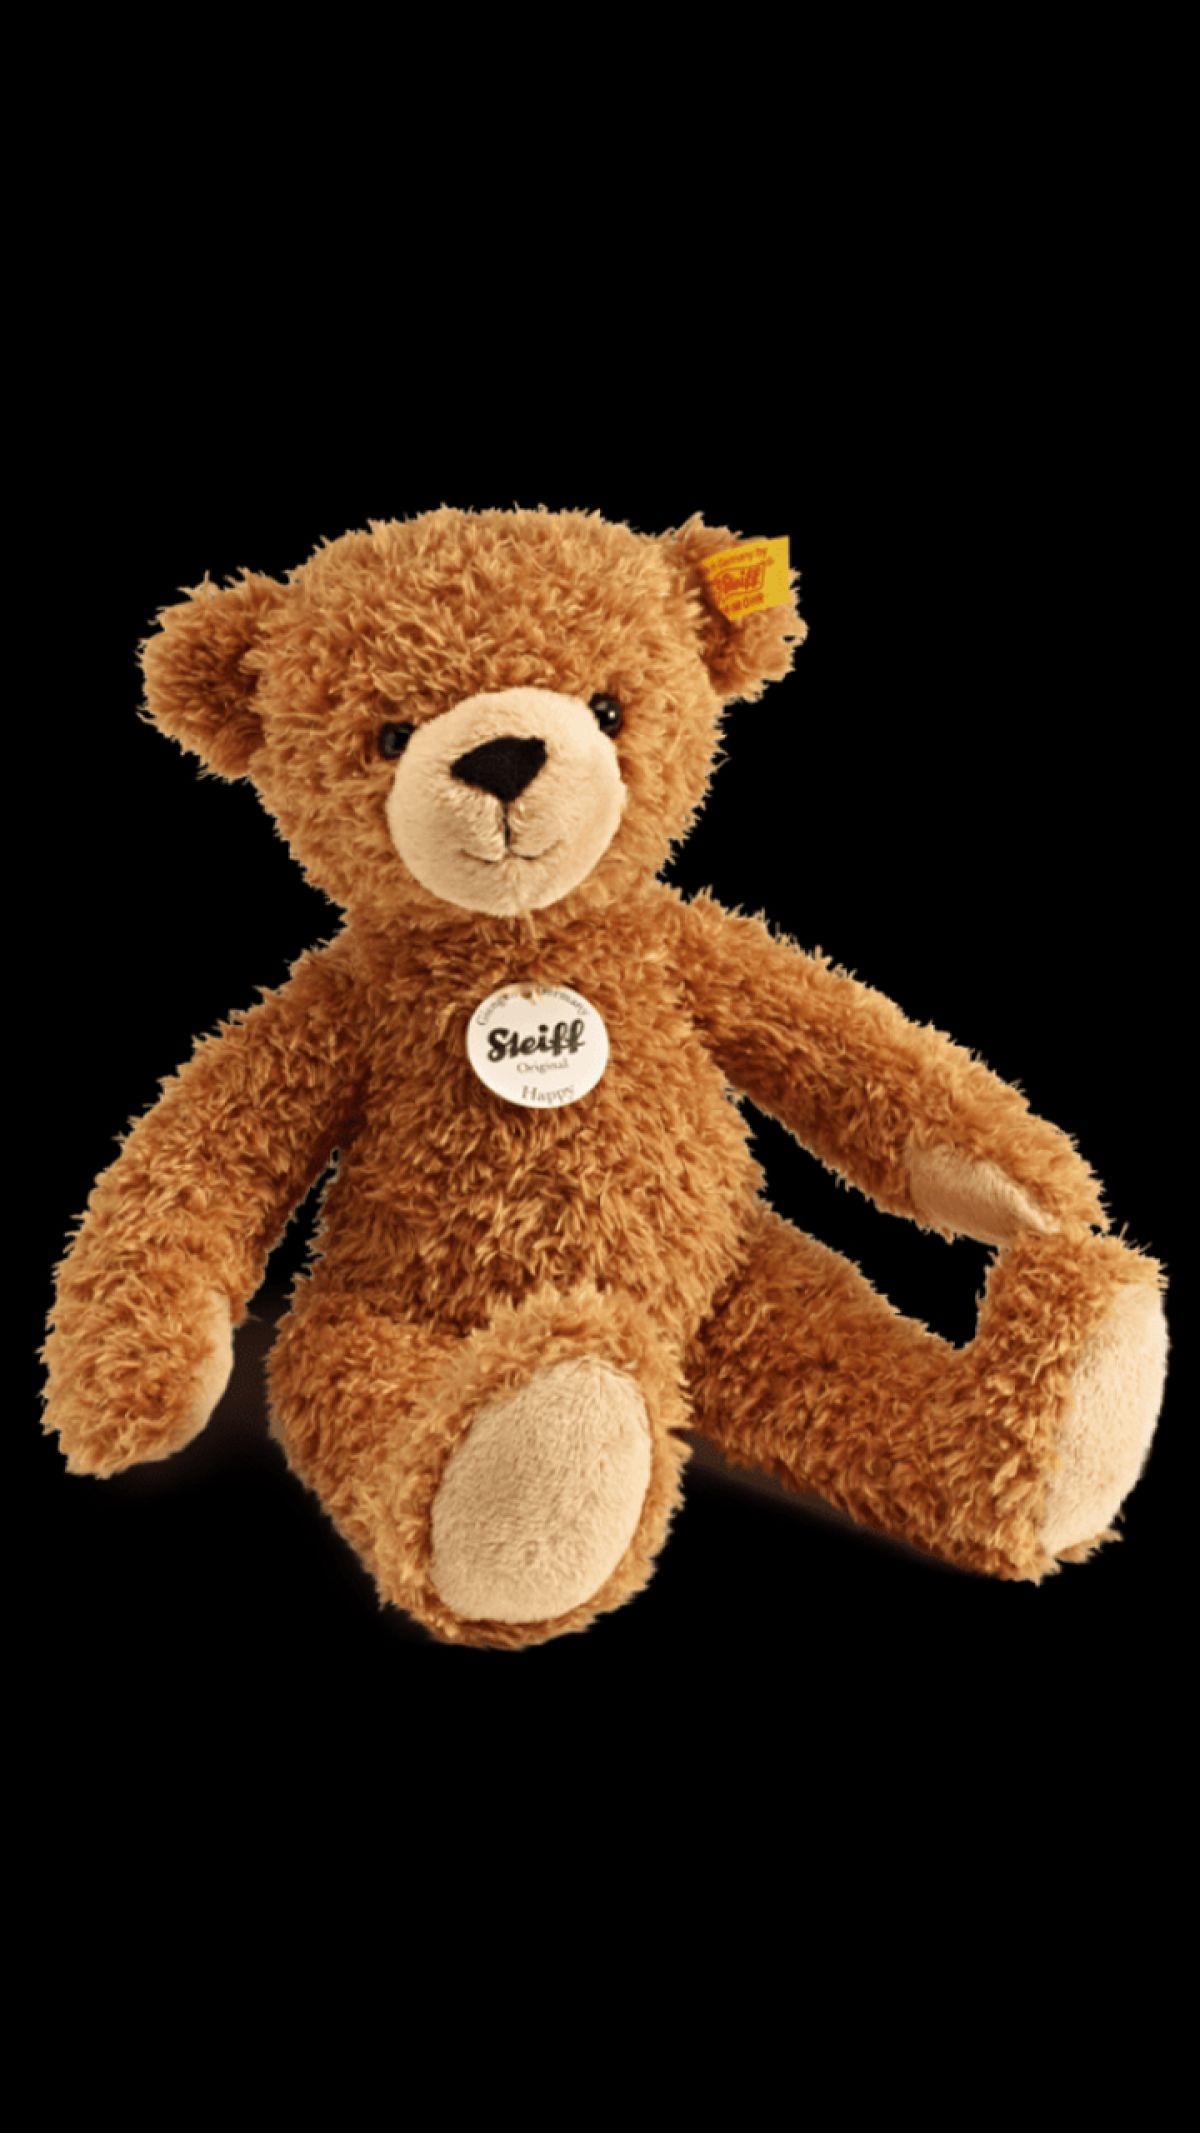 10 Most expensive Teddy Bears in the world, Price will blow your mind